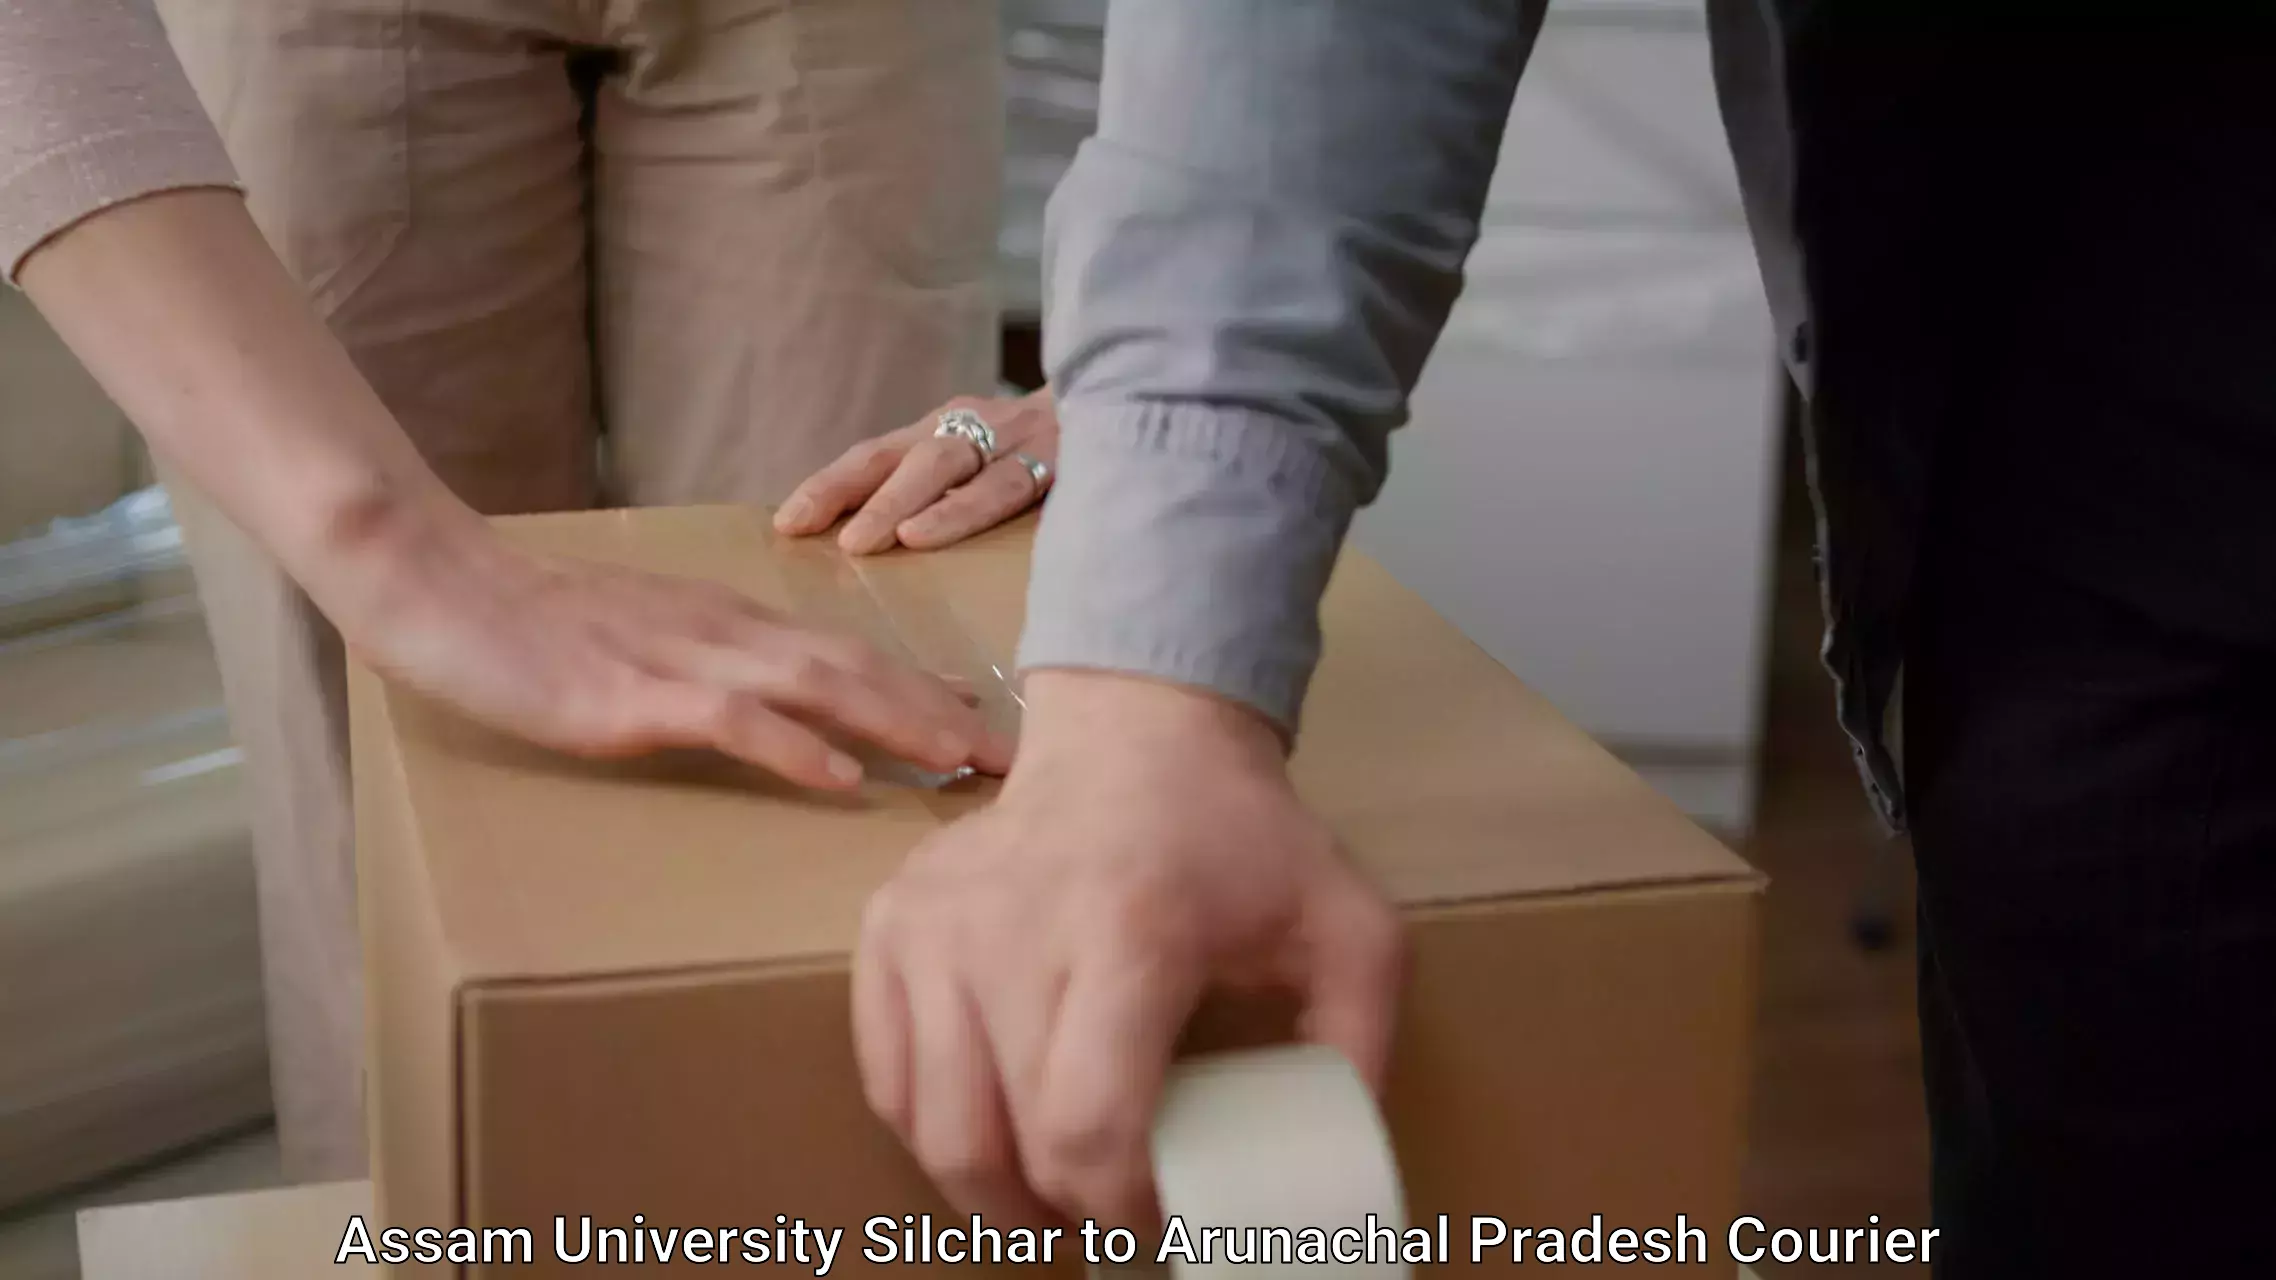 Furniture relocation services in Assam University Silchar to Likabali